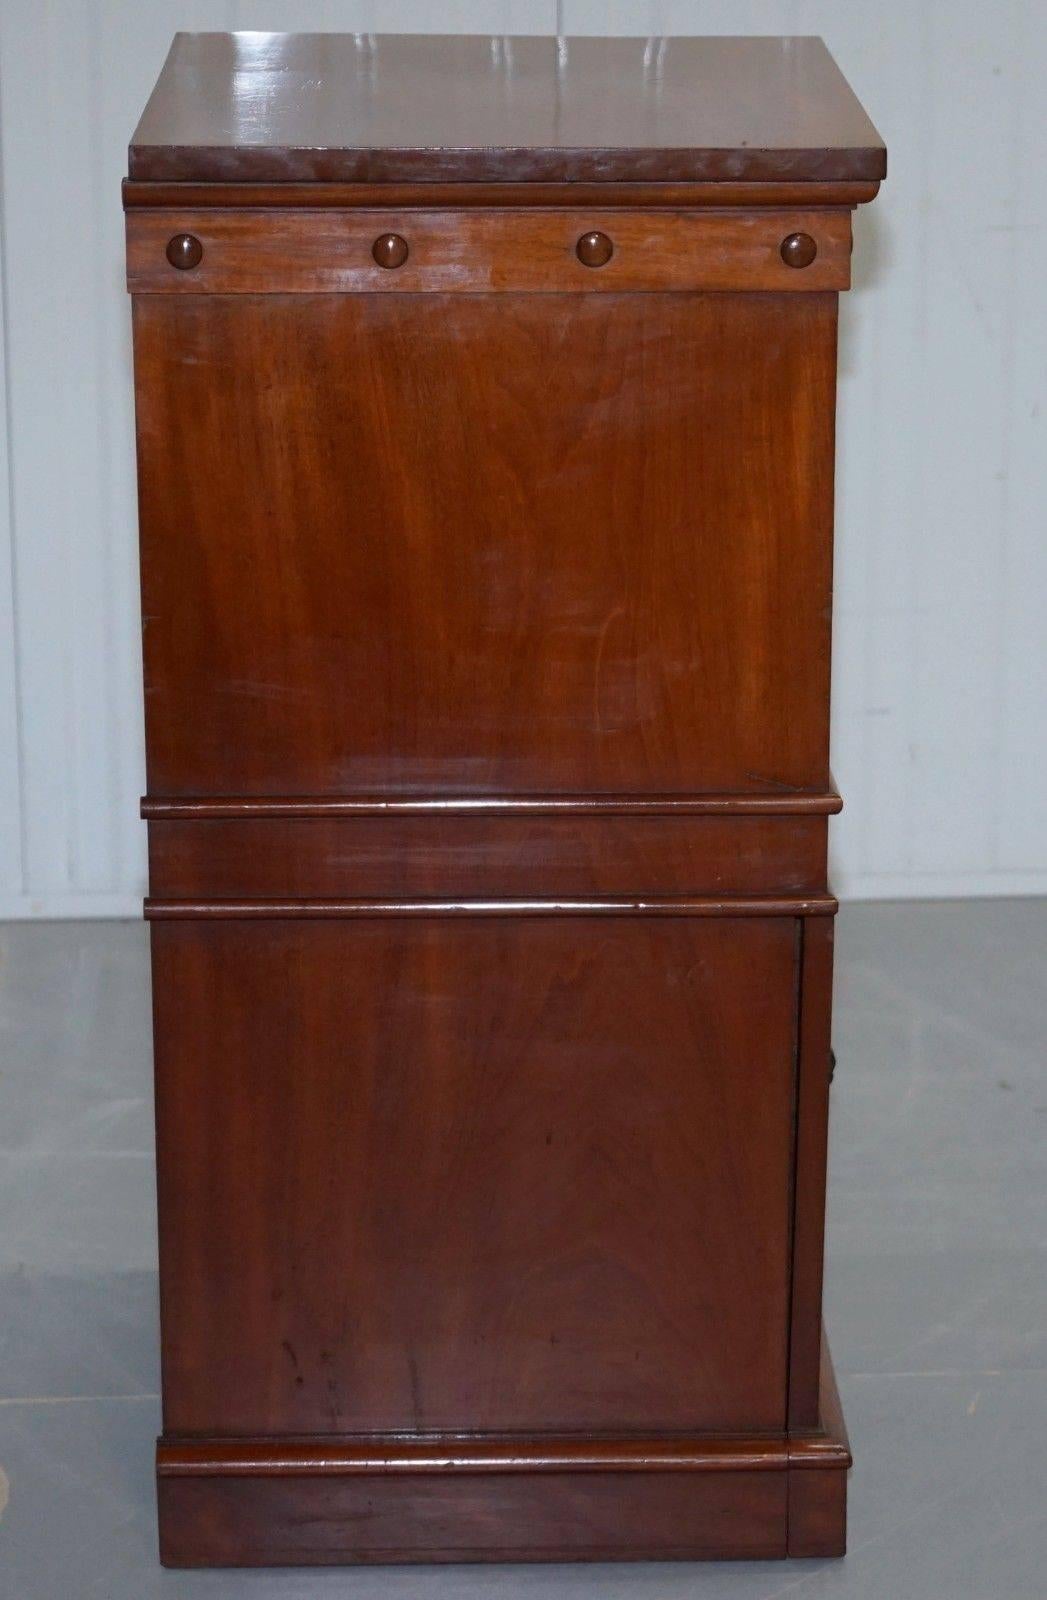 Rare C Hindley and Sons, 1766-1895 Satin Walnut Drinks Pedestal Cabinet Tambour 1